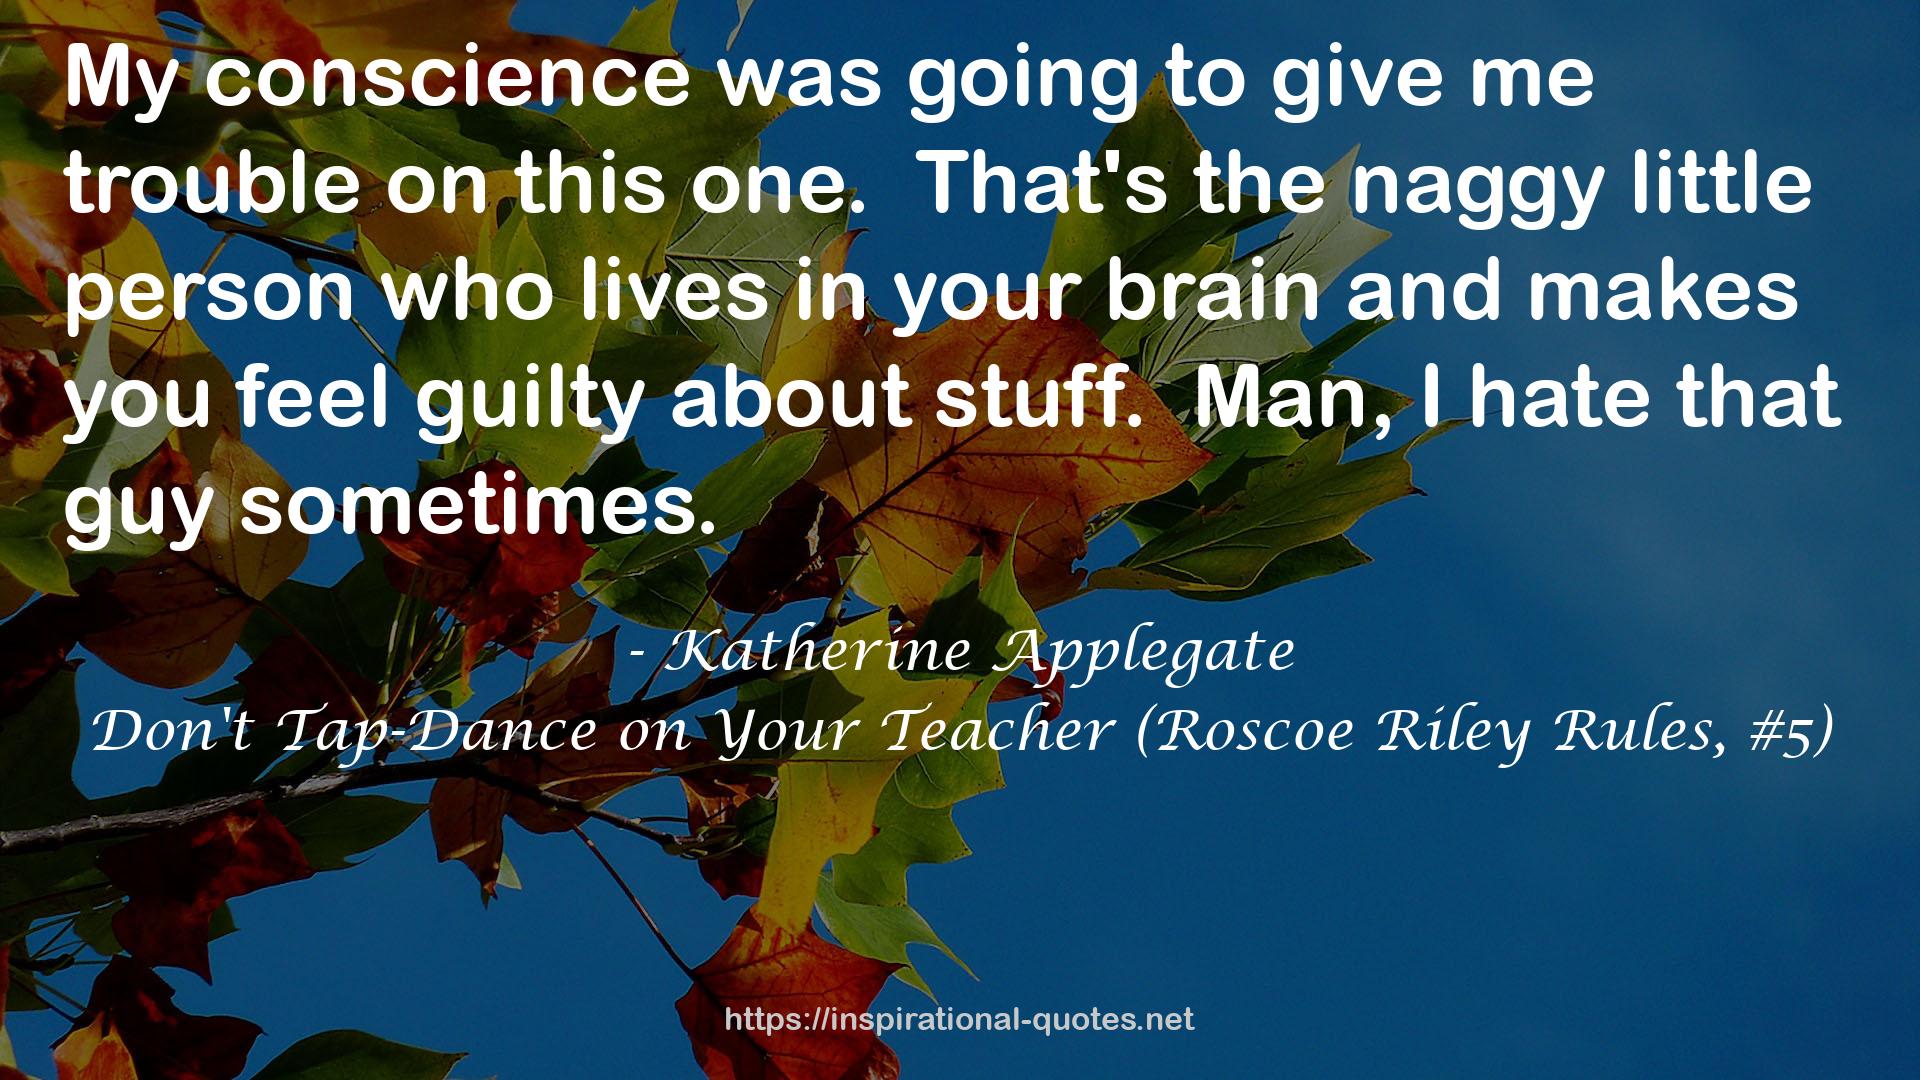 Don't Tap-Dance on Your Teacher (Roscoe Riley Rules, #5) QUOTES